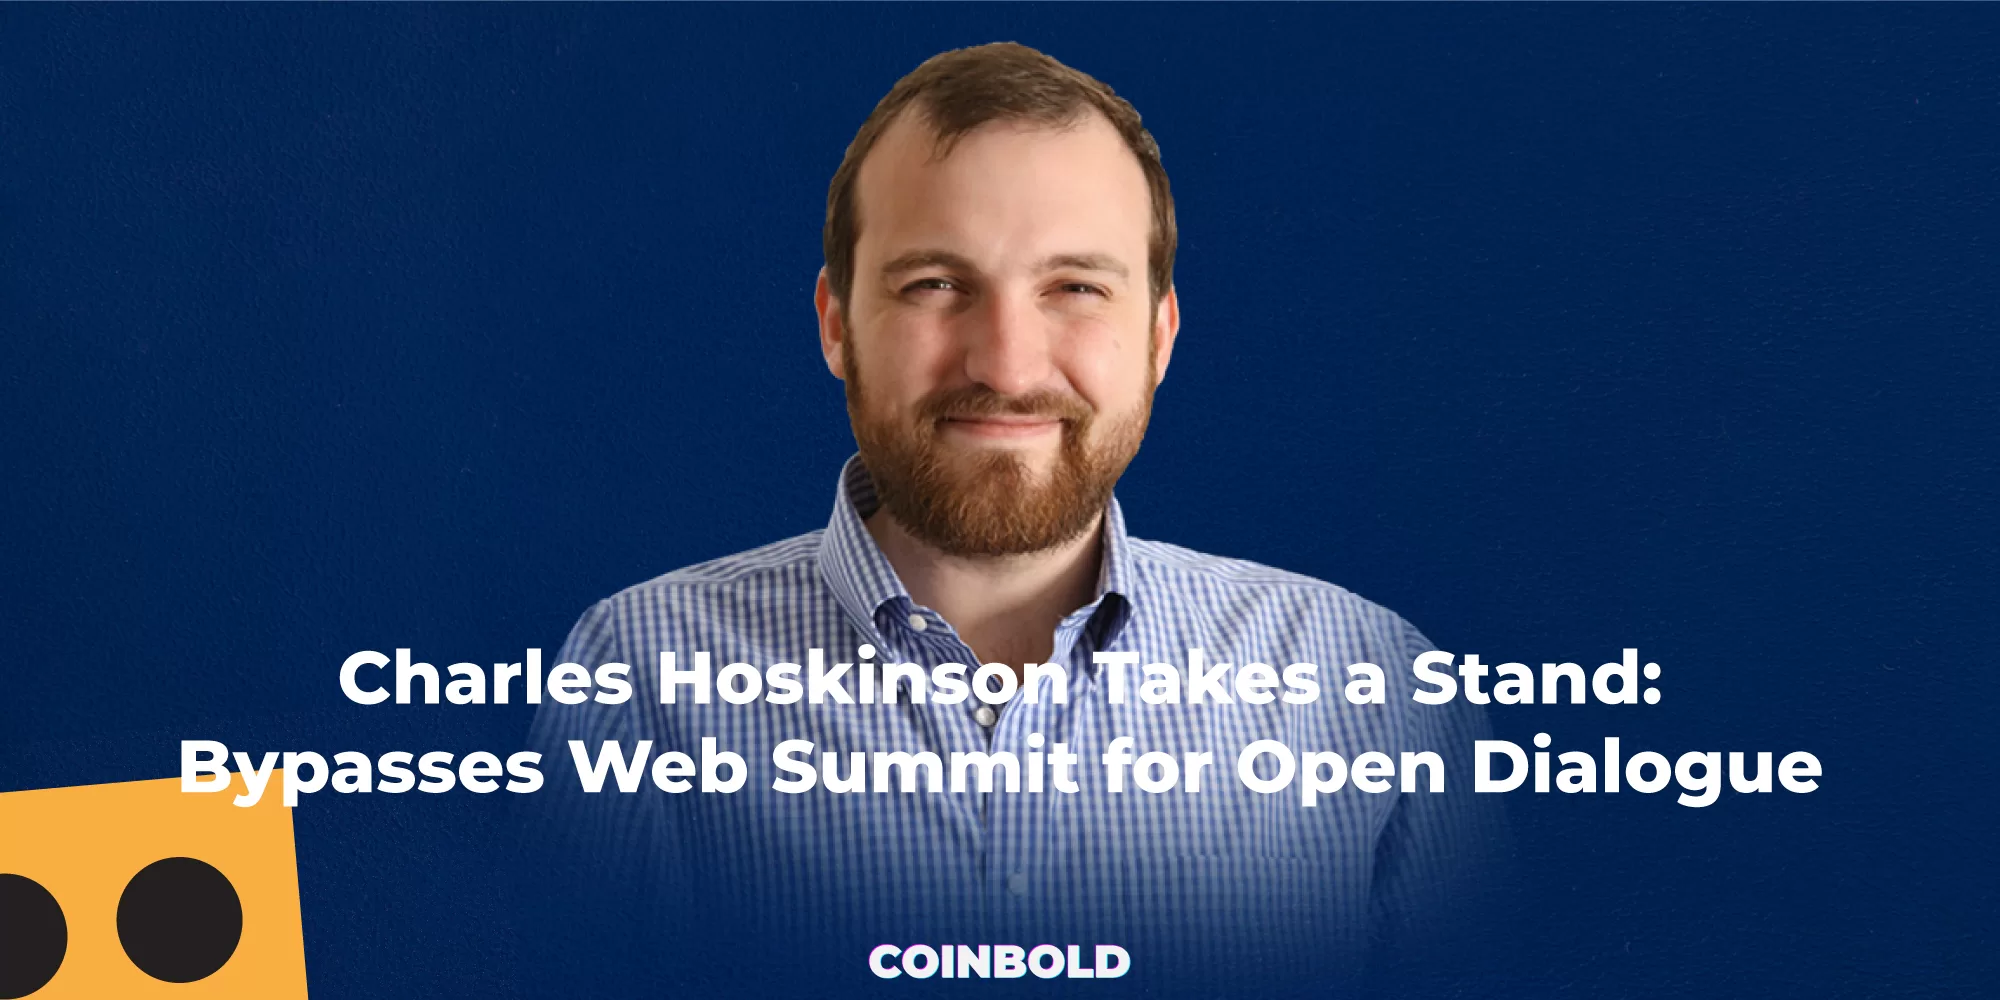 Charles Hoskinson Takes a Stand Bypasses Web Summit for Open Dialogue